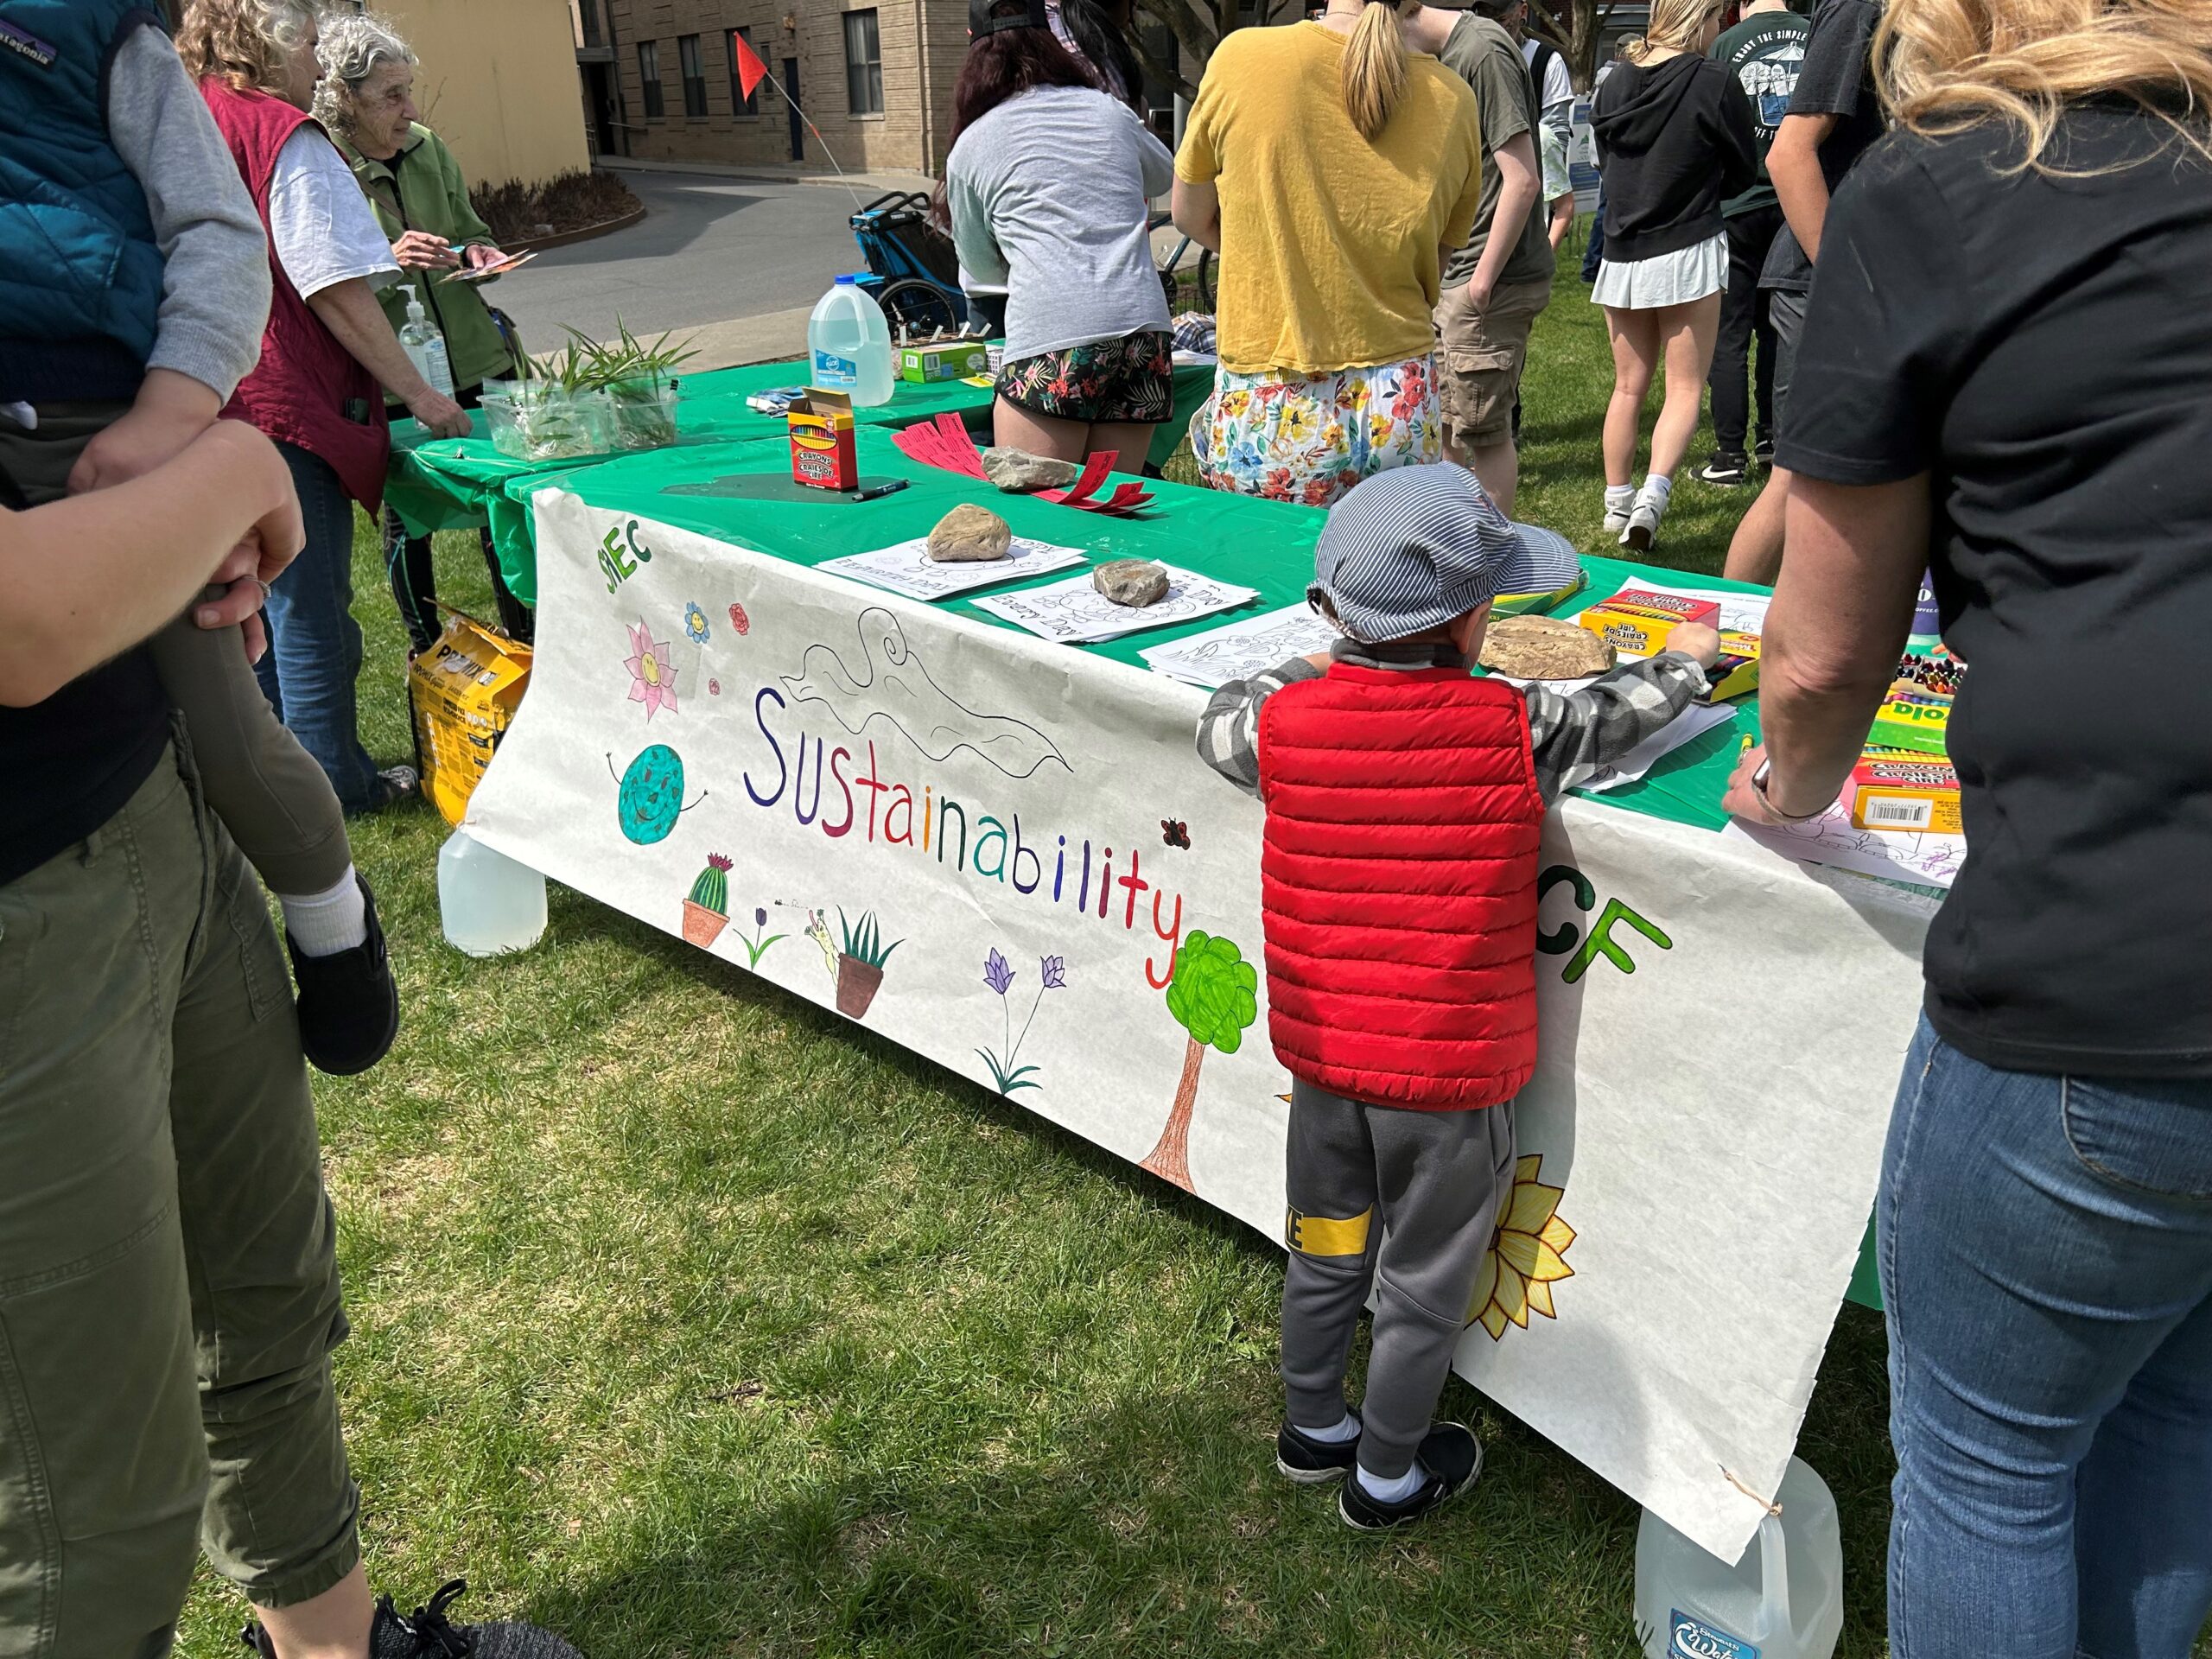 Earth Day events in Glens falls make people think about planet’s future